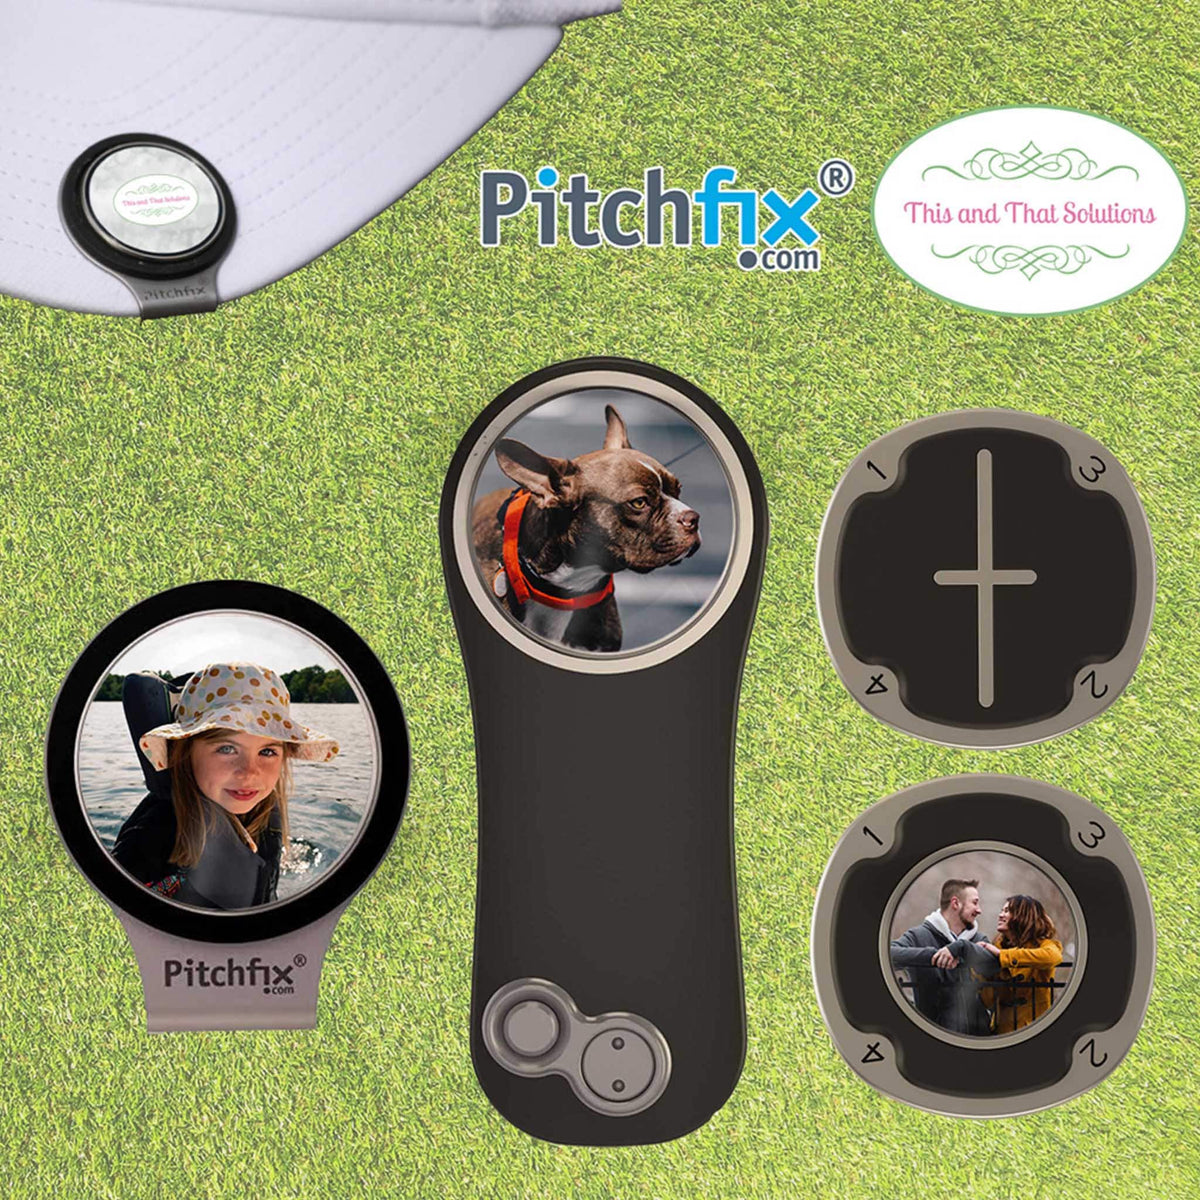 Personalized PitchFix MultiMarker Tool | Custom Ball Markers | Golf Gifts | Good Players Mark Their Ball